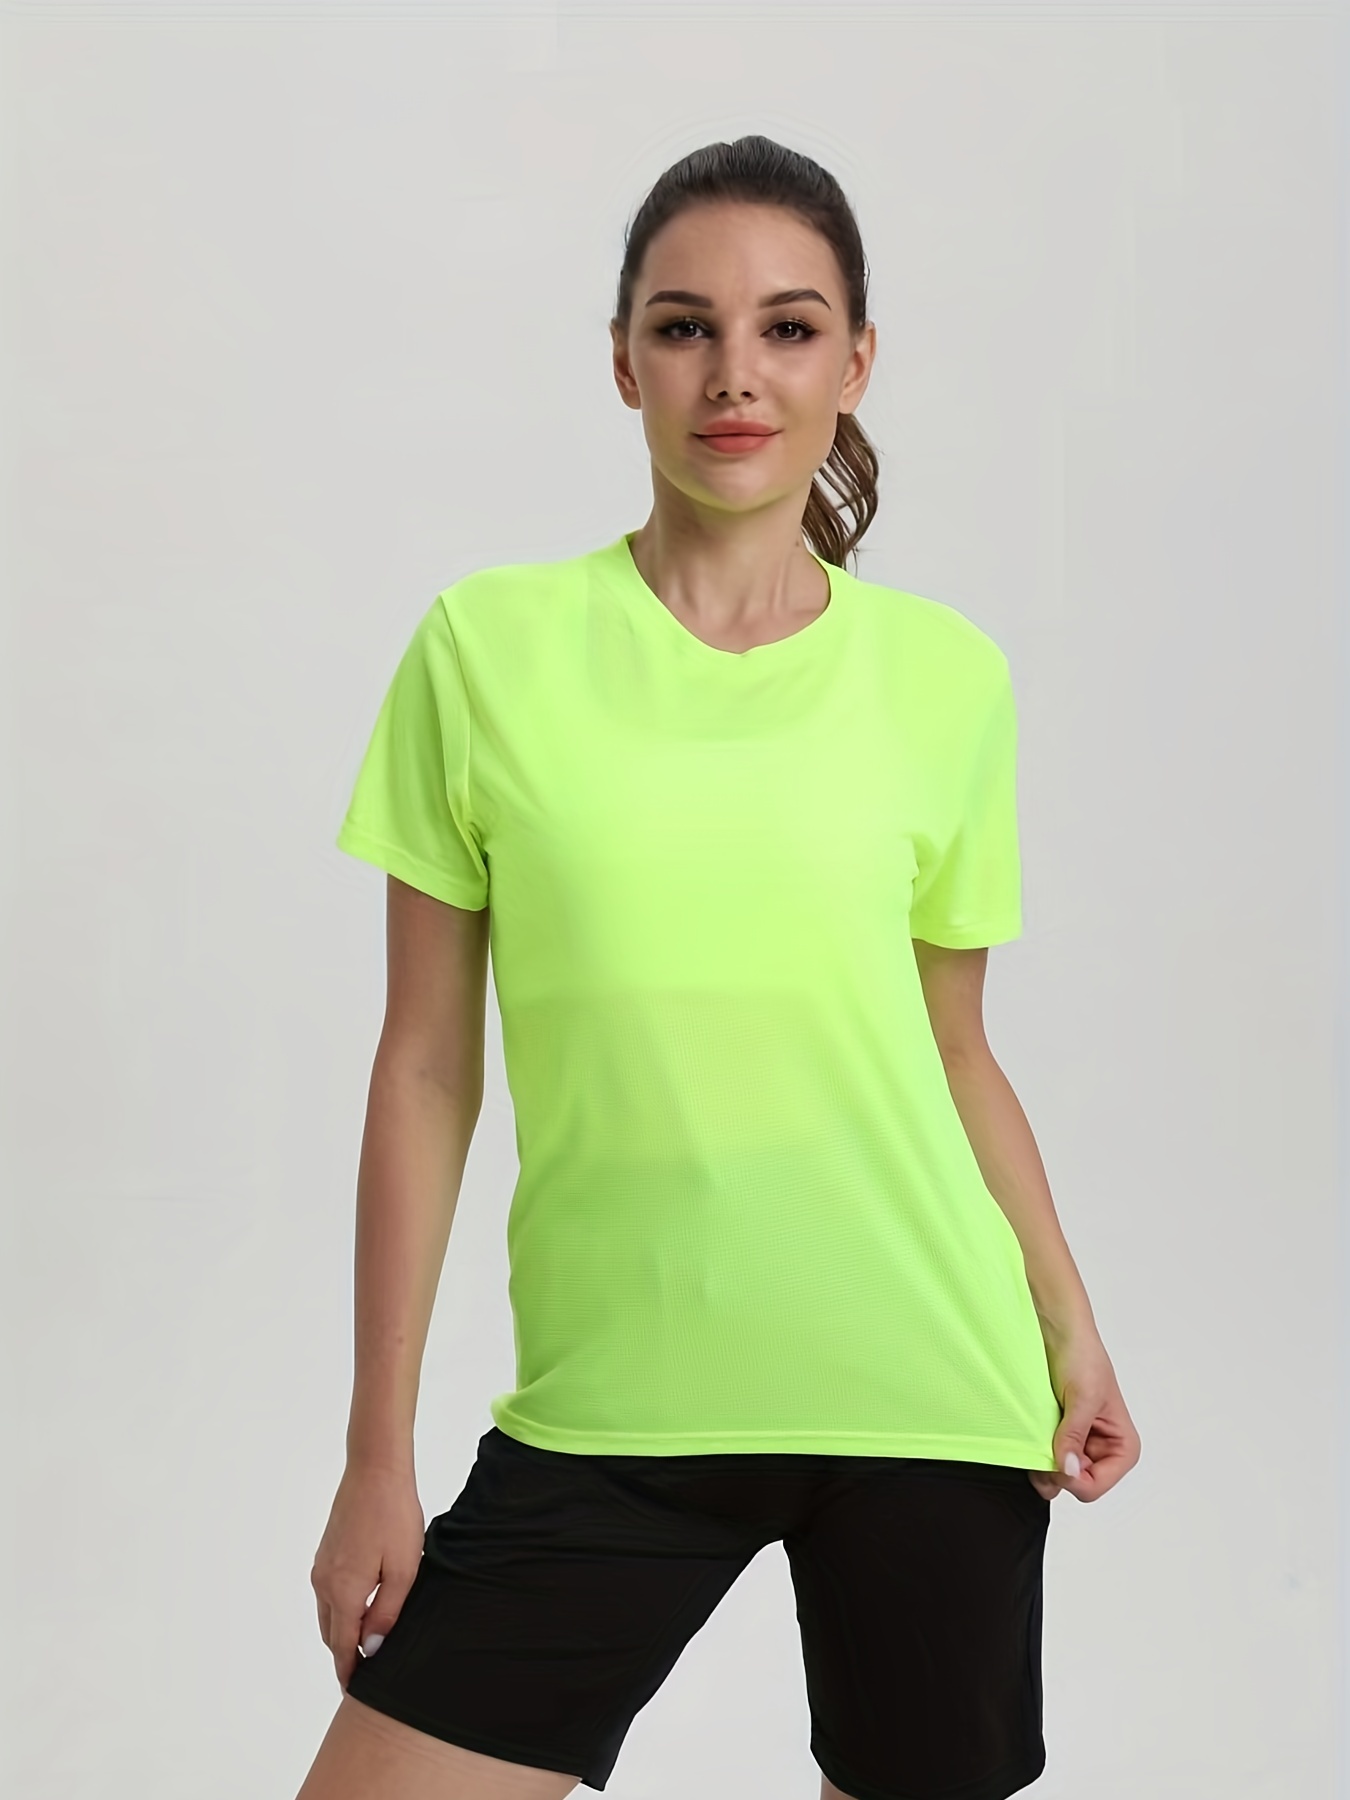 Sports T-Shirts For Women Online in India - Gym, Running Tees